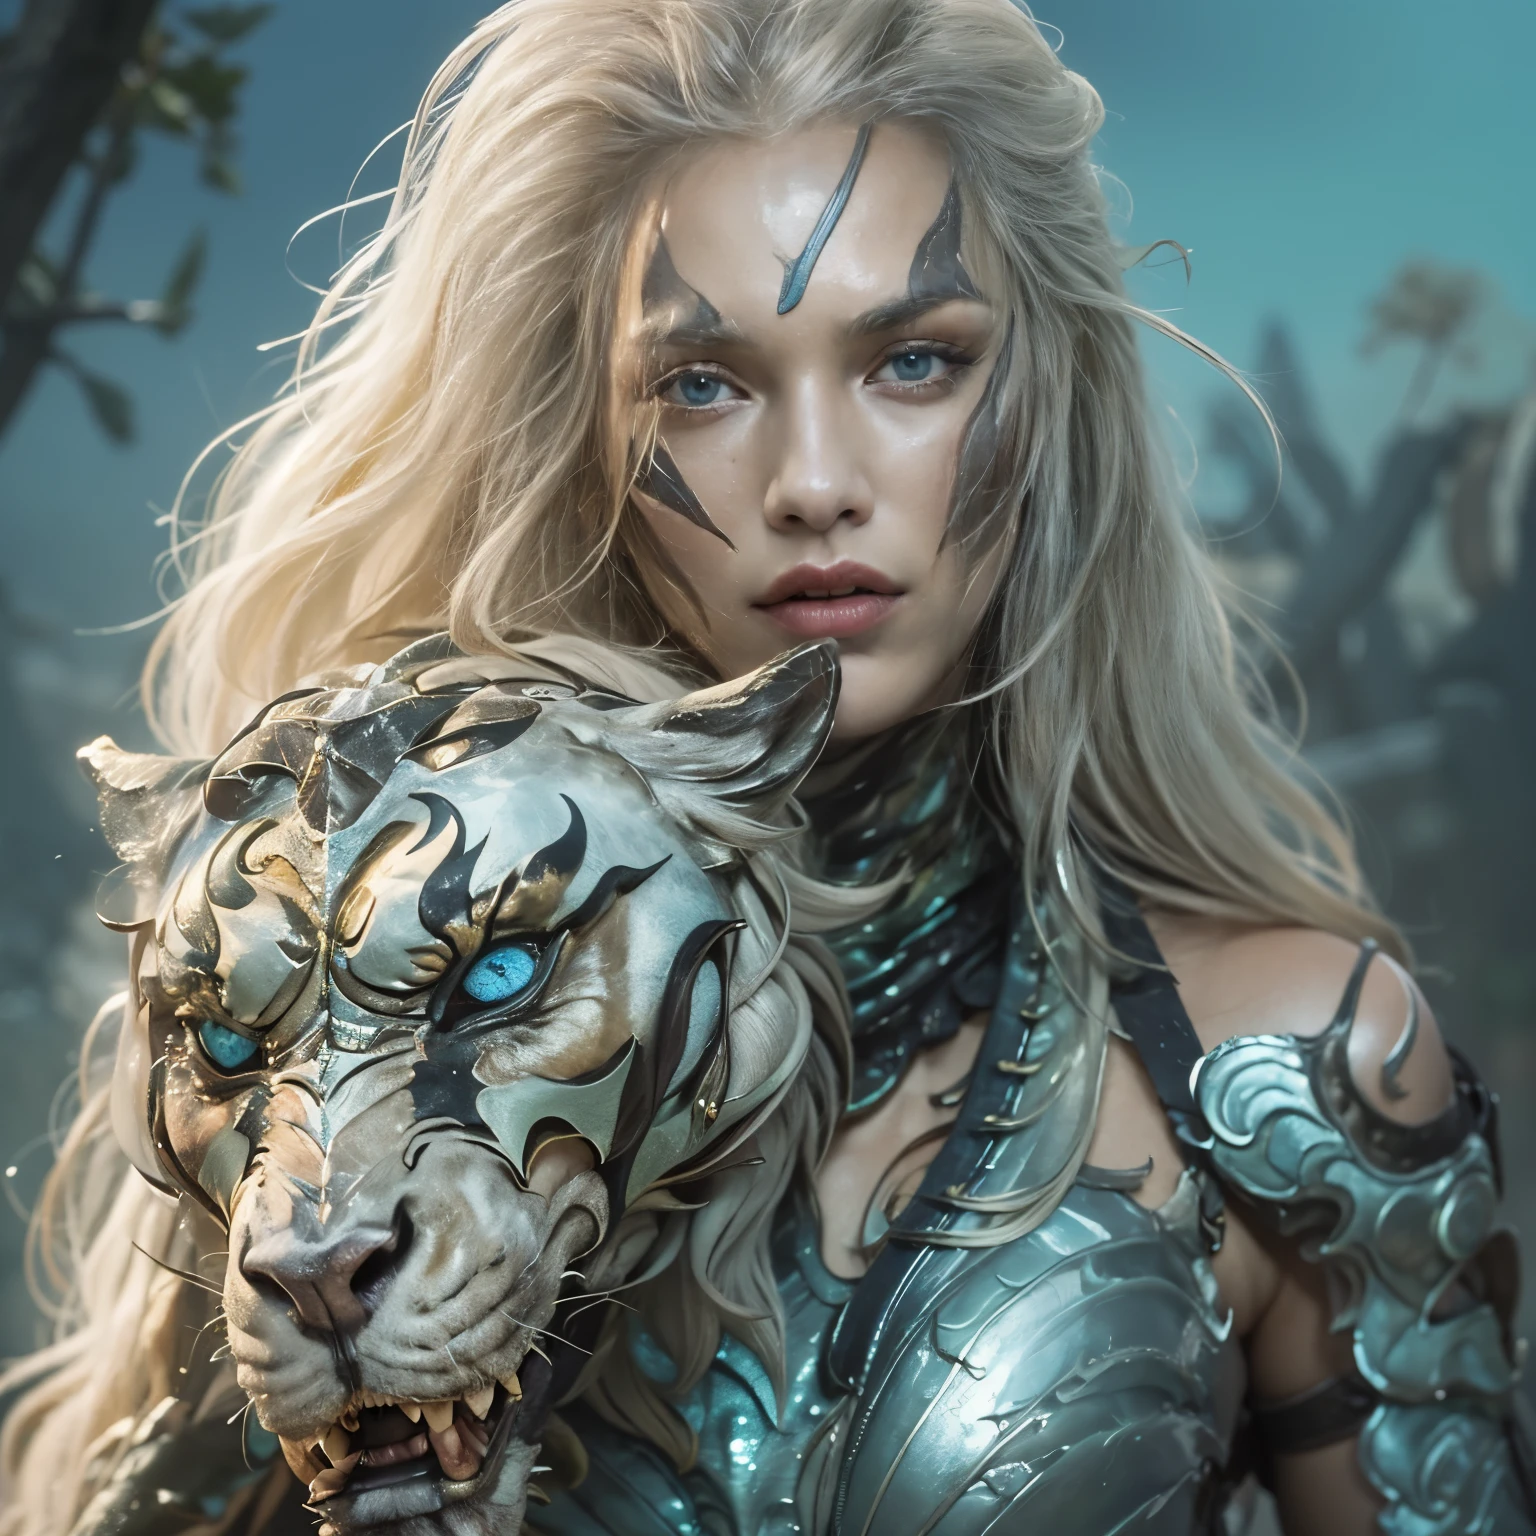 1 female alien, The predator, warrior, (extremely beautiful:1.2), (intense gaze:1.4), (predator:1.1), long dark claws, NSFW,  nipples, thick eyebrows, glowing and shining sky blue eyes, the most beautiful face in the universe, platinum blonde,

A woman with an extremely beautiful face, her intense gaze fixed on her prey, a primal force that could not be denied.

(extreamly beautiful lean body:1.5), (ultra muscular build:1.2), (prowling:1.3), (sleek movements:1.4),

Her beautiful body, muscular and toned, moved with sleek grace as she prowled, ready to strike at a moment's notice. The predator within her was always on